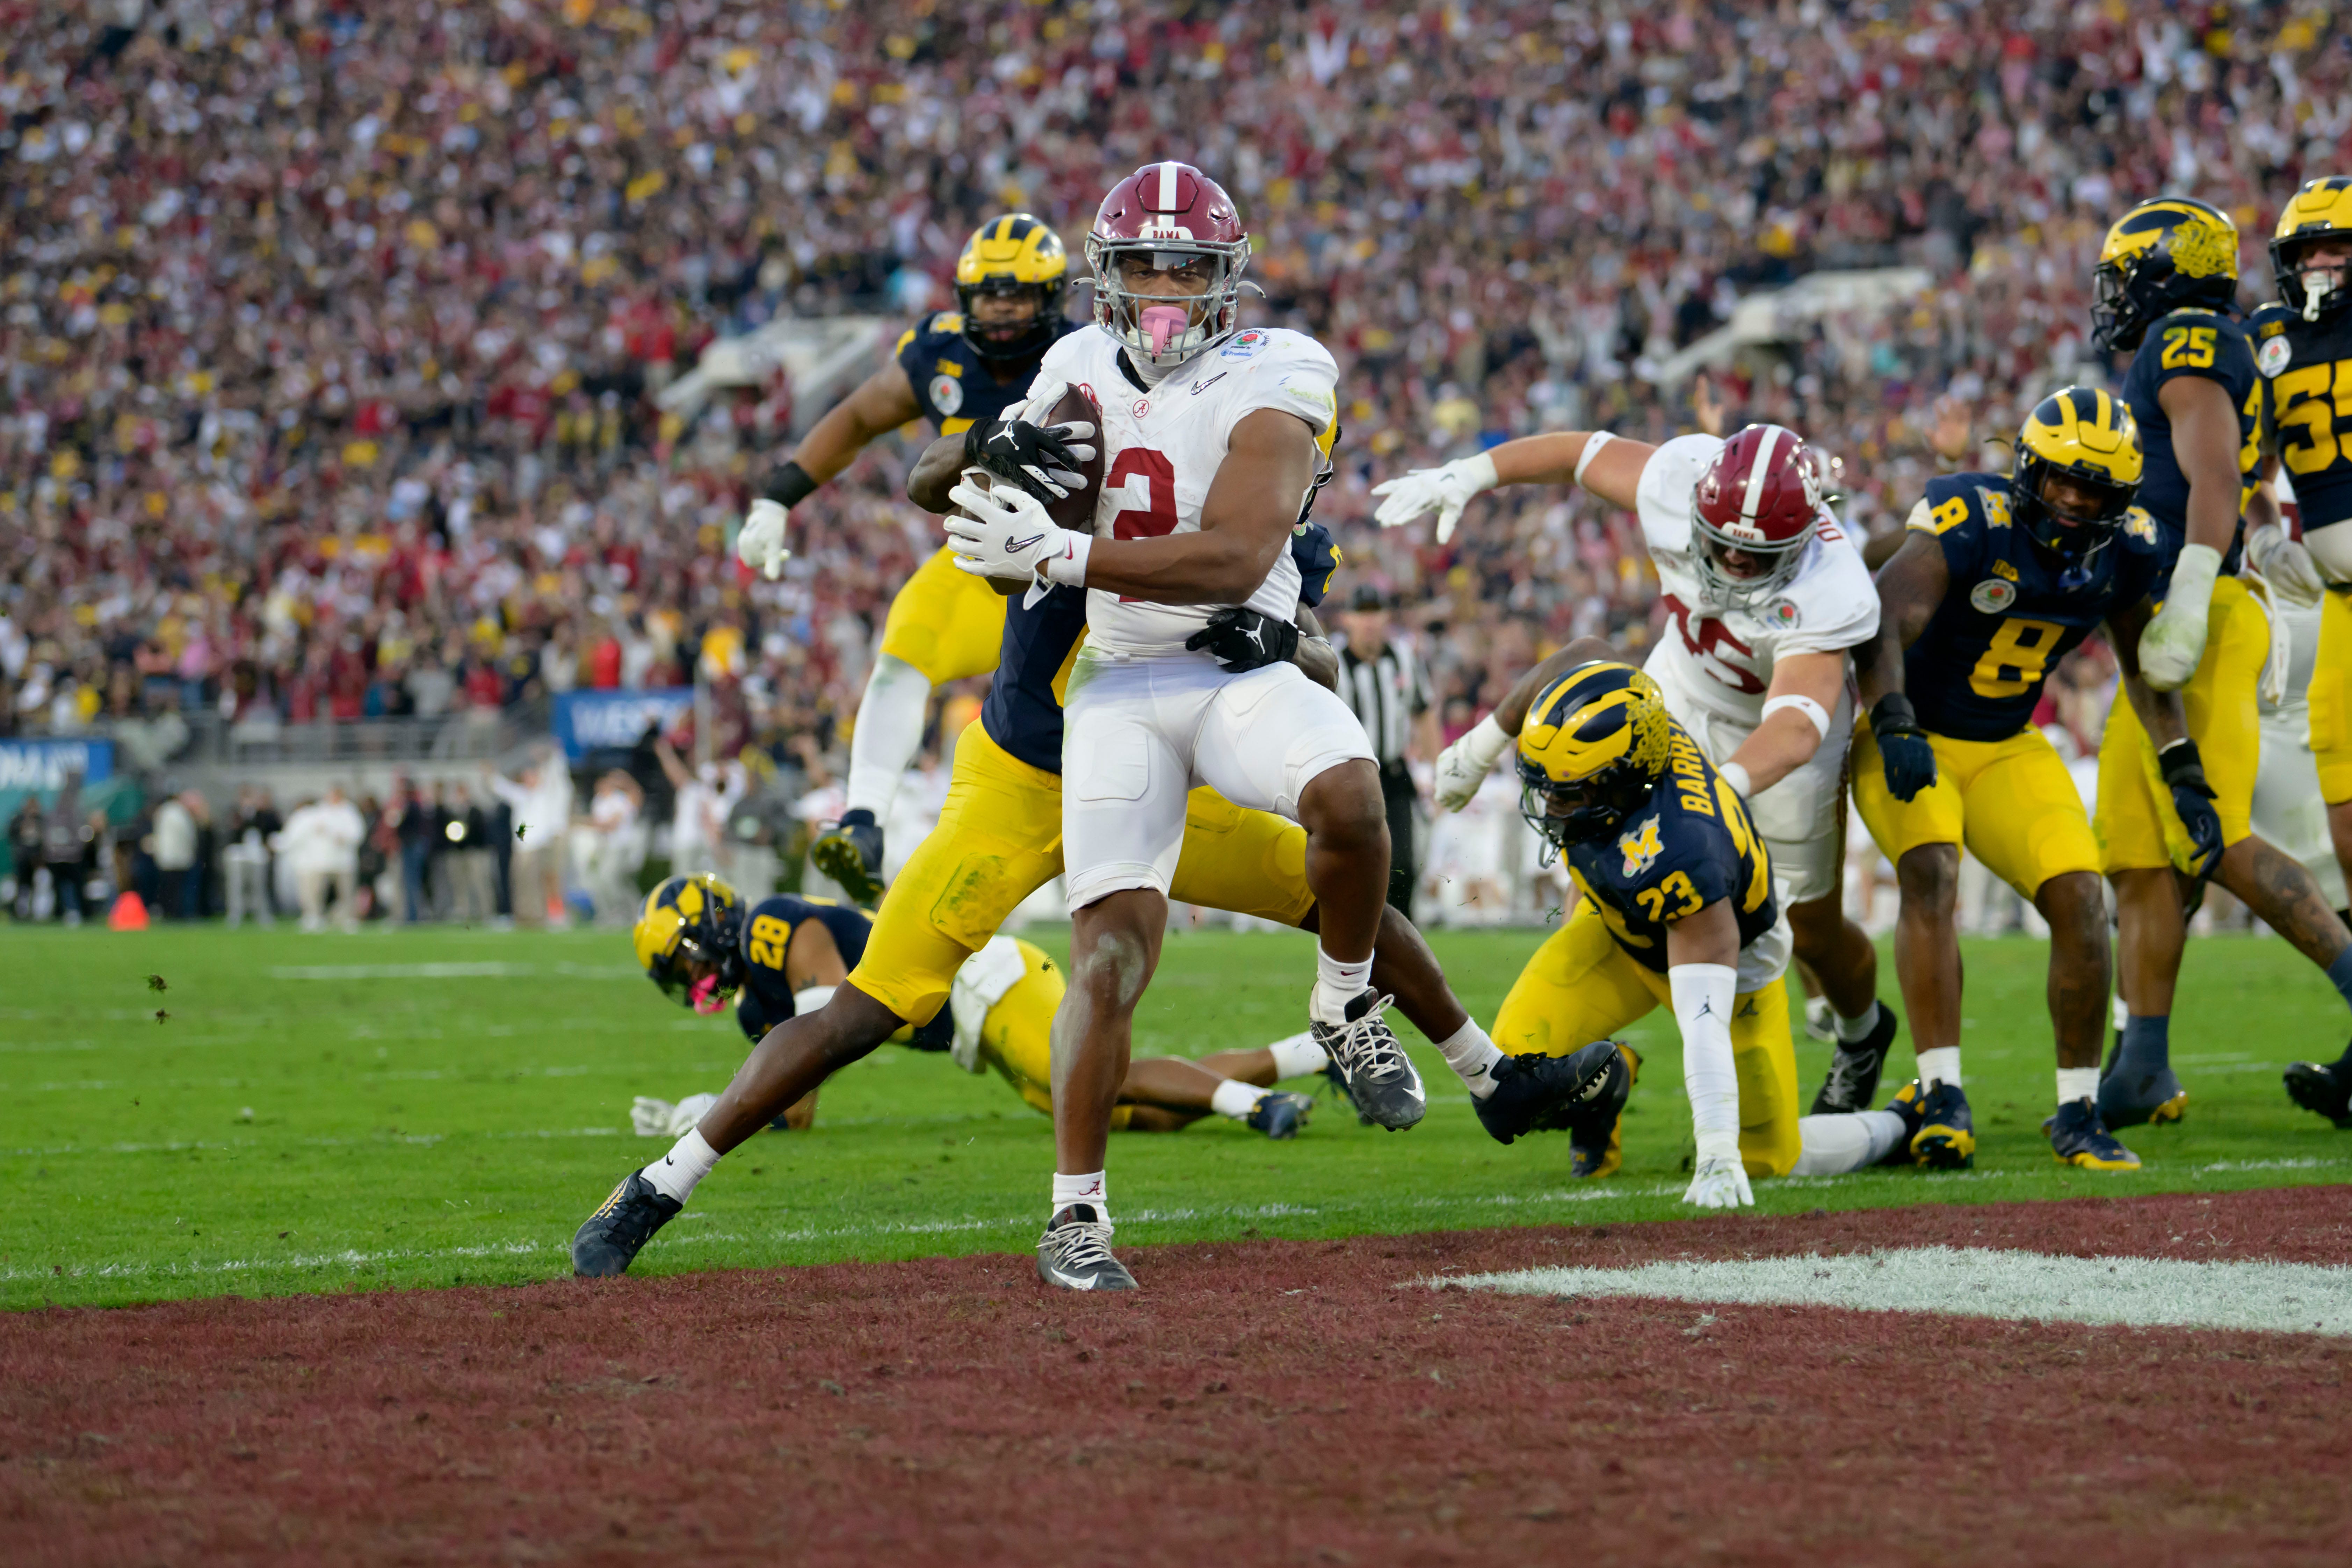 Alabama running back Jase McClellan runs for a touchdown during the fourth quarter of the Rose Bowl, in Pasadena, California, January 1, 2024.